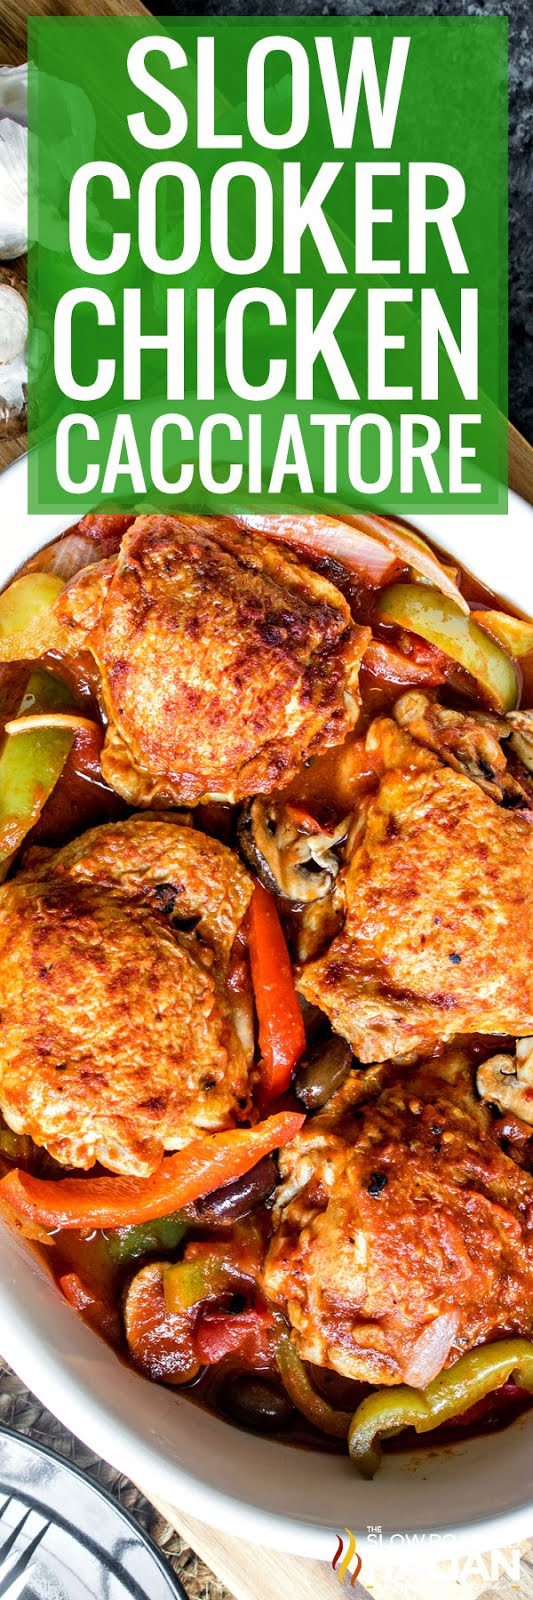 slow cooker chicken cacciatore -pin